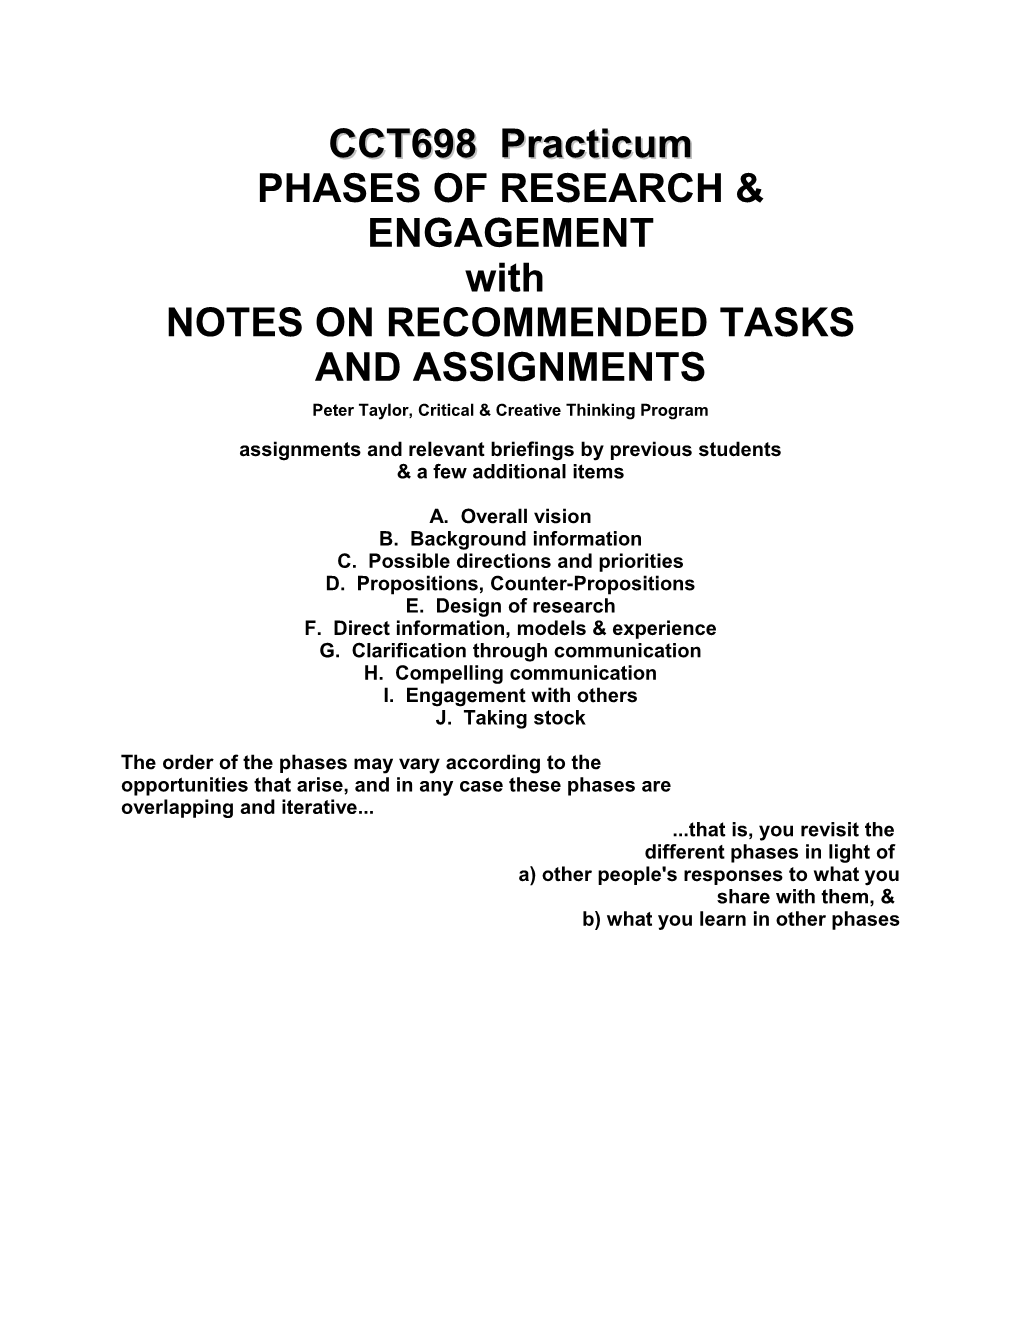 Notes on Recommended Tasks and Assignments